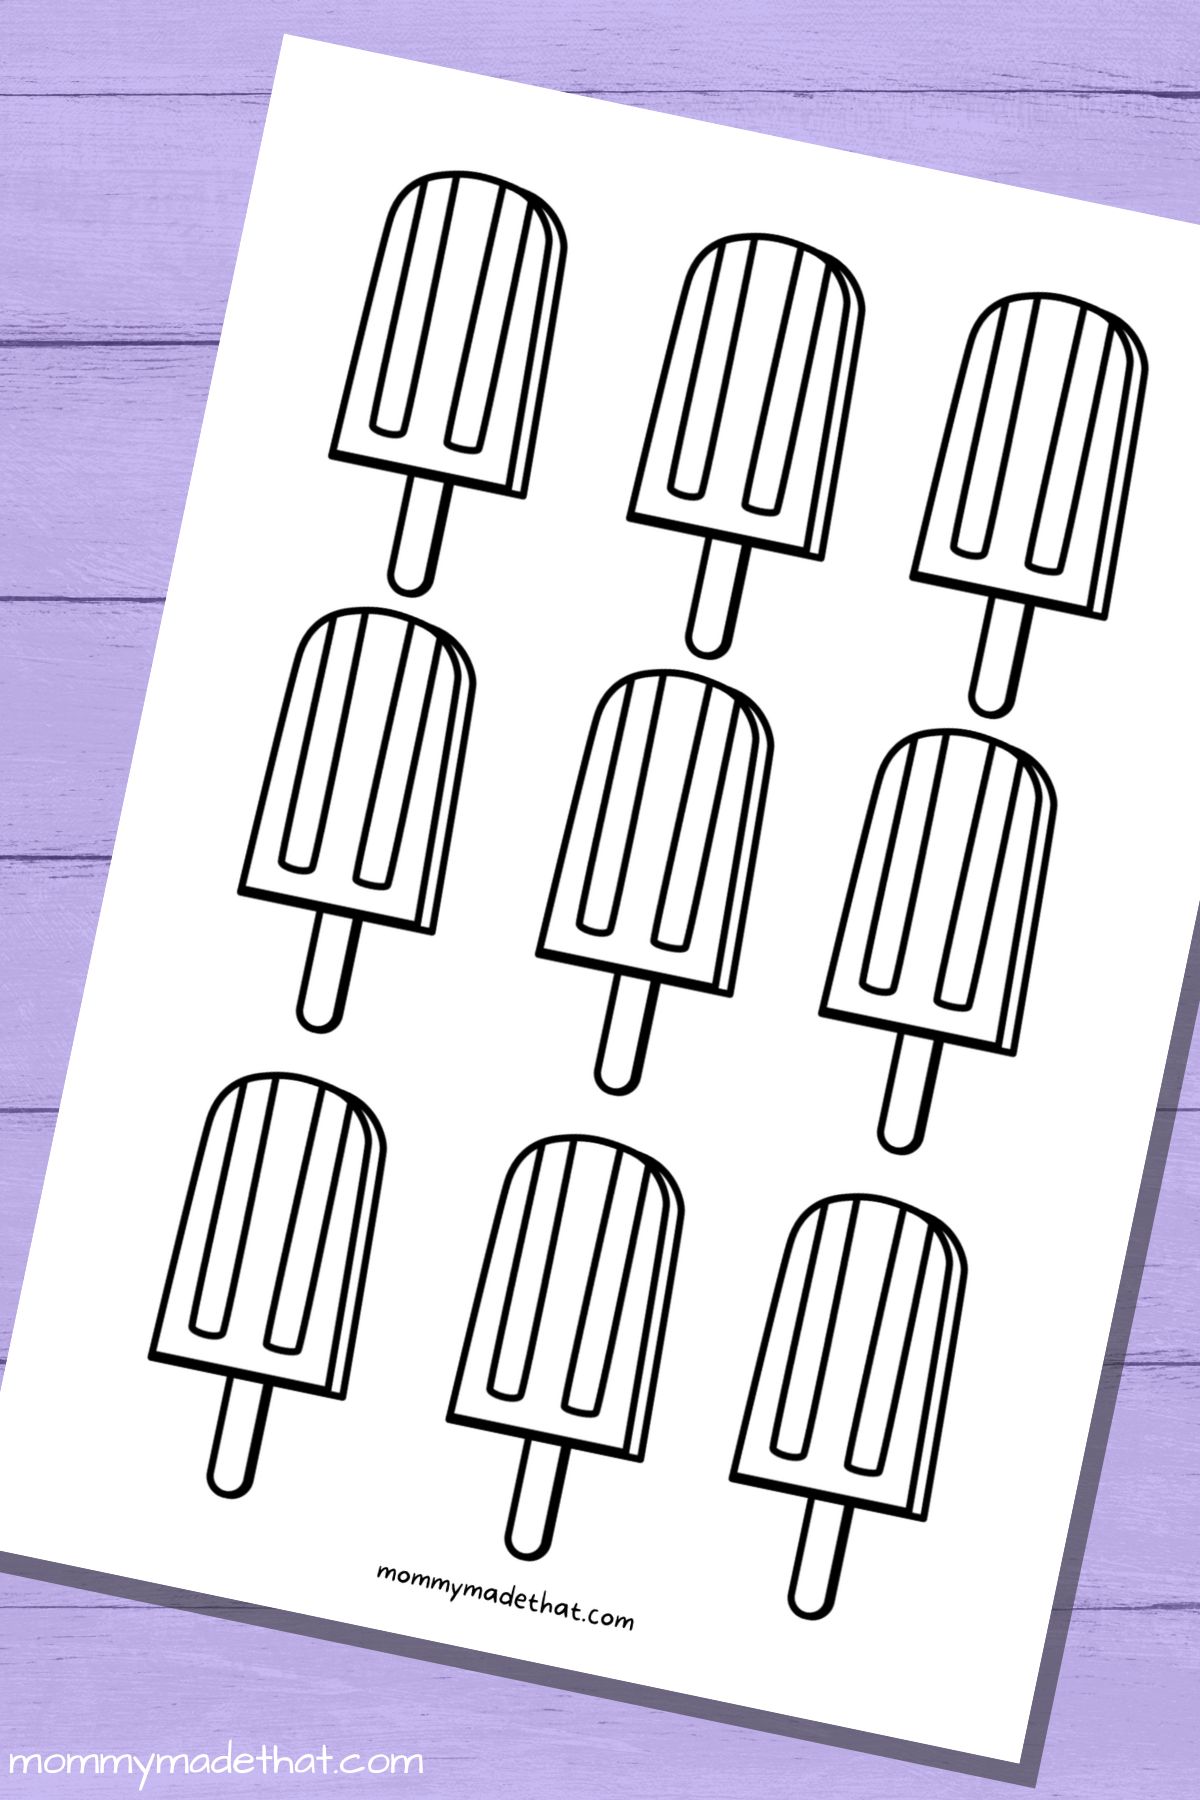 popsicle templates